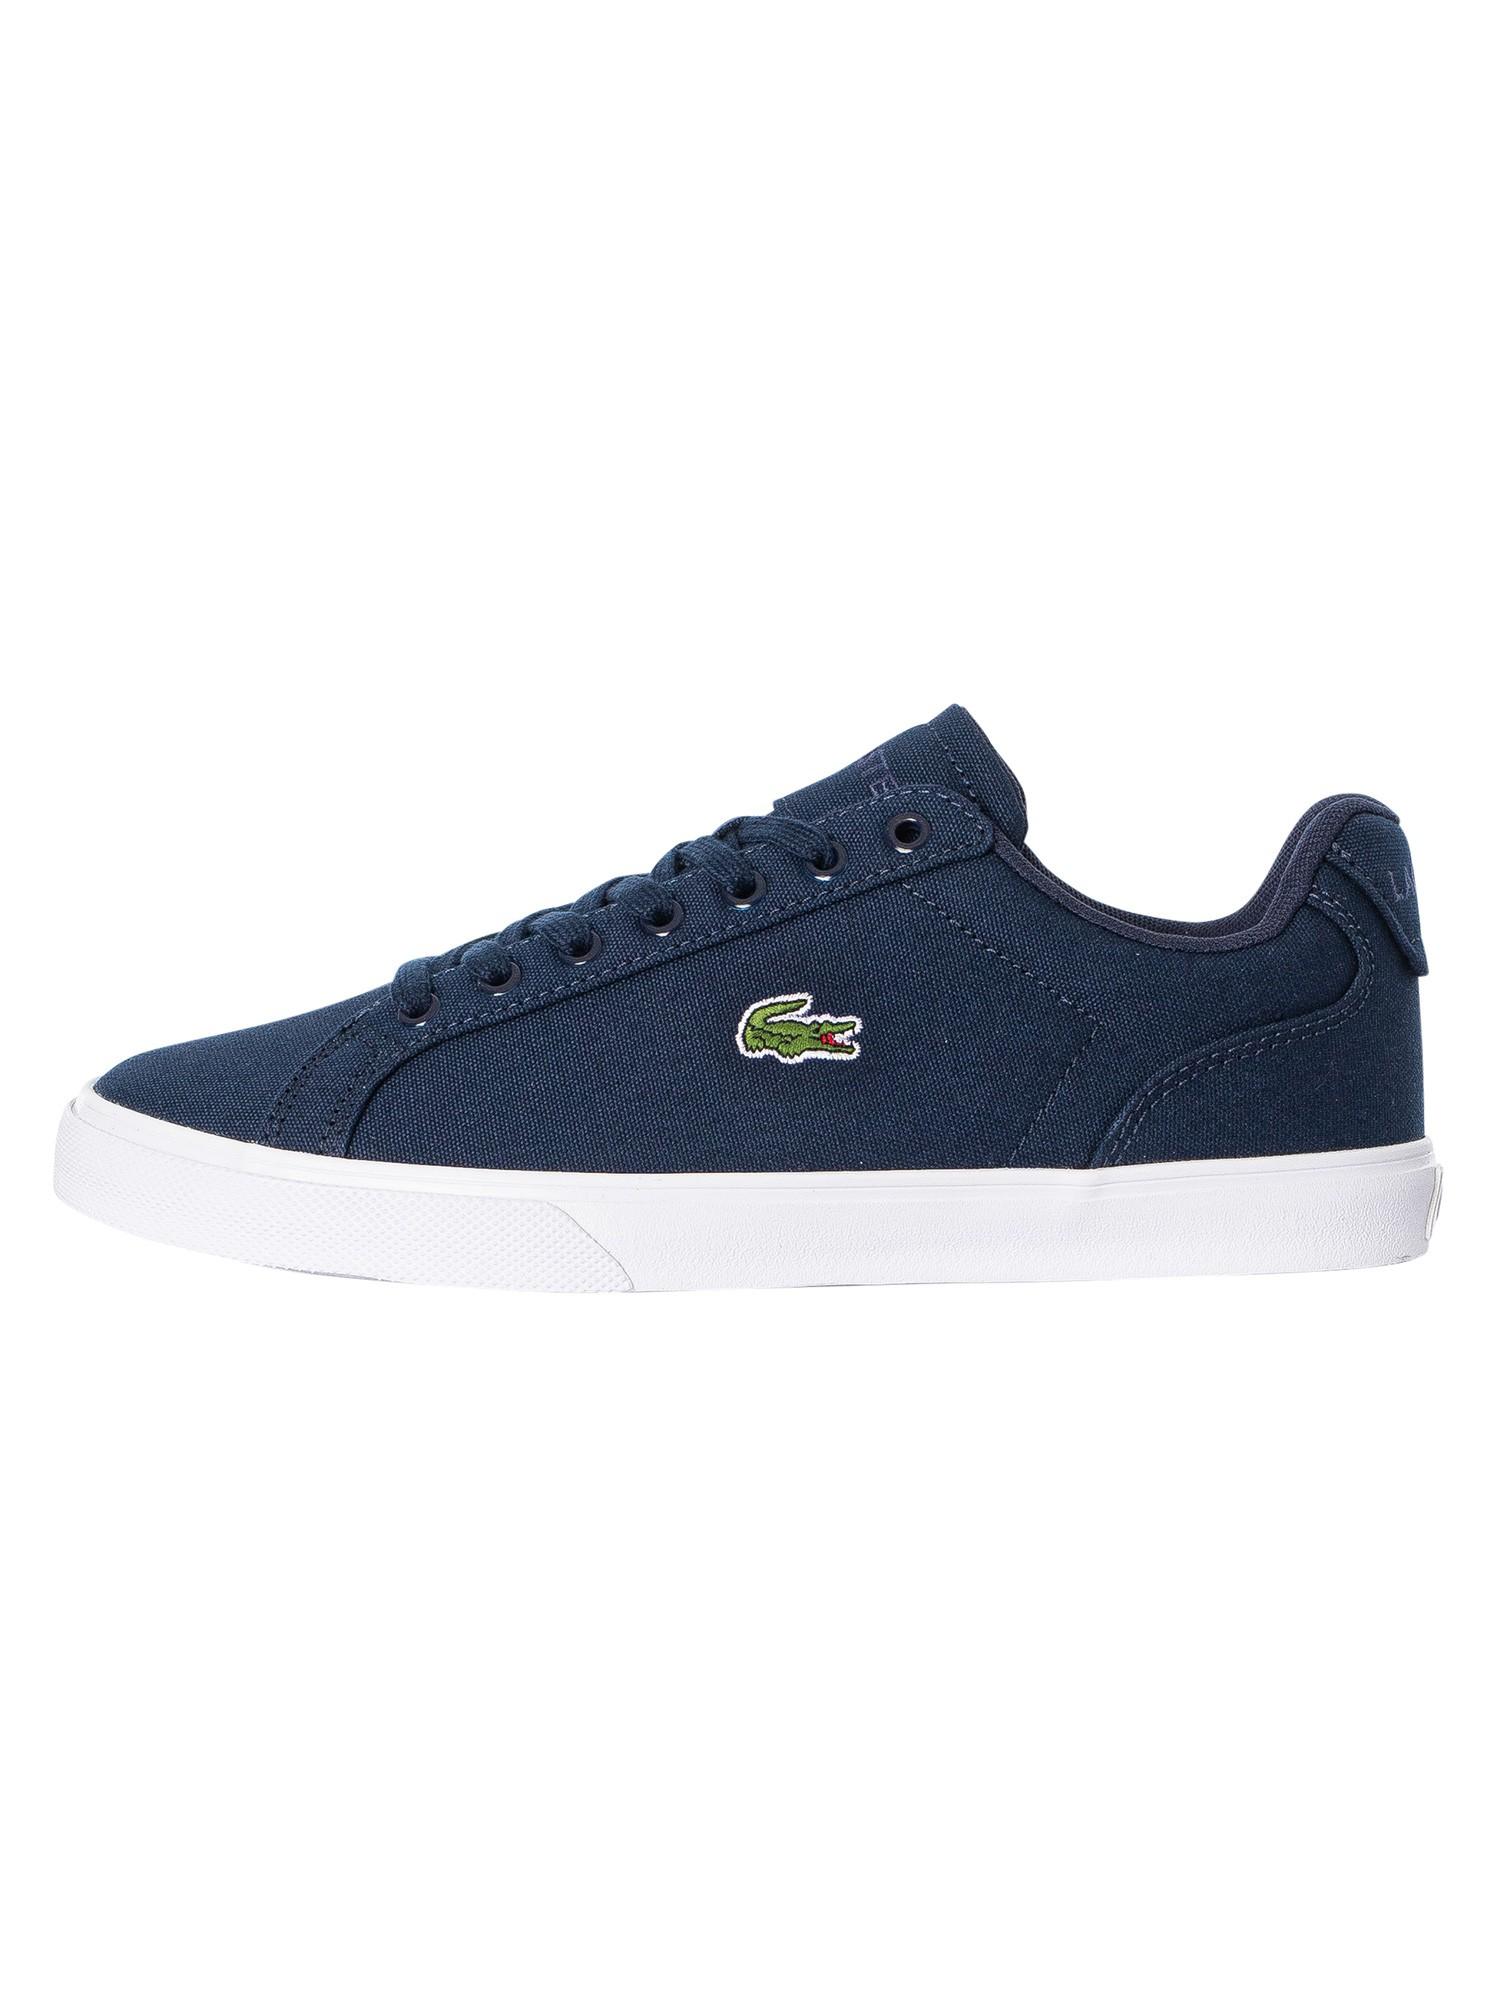 Lacoste Lerond Pro Bl 123 1 Cma Canvas Trainers in Blue for Men | Lyst